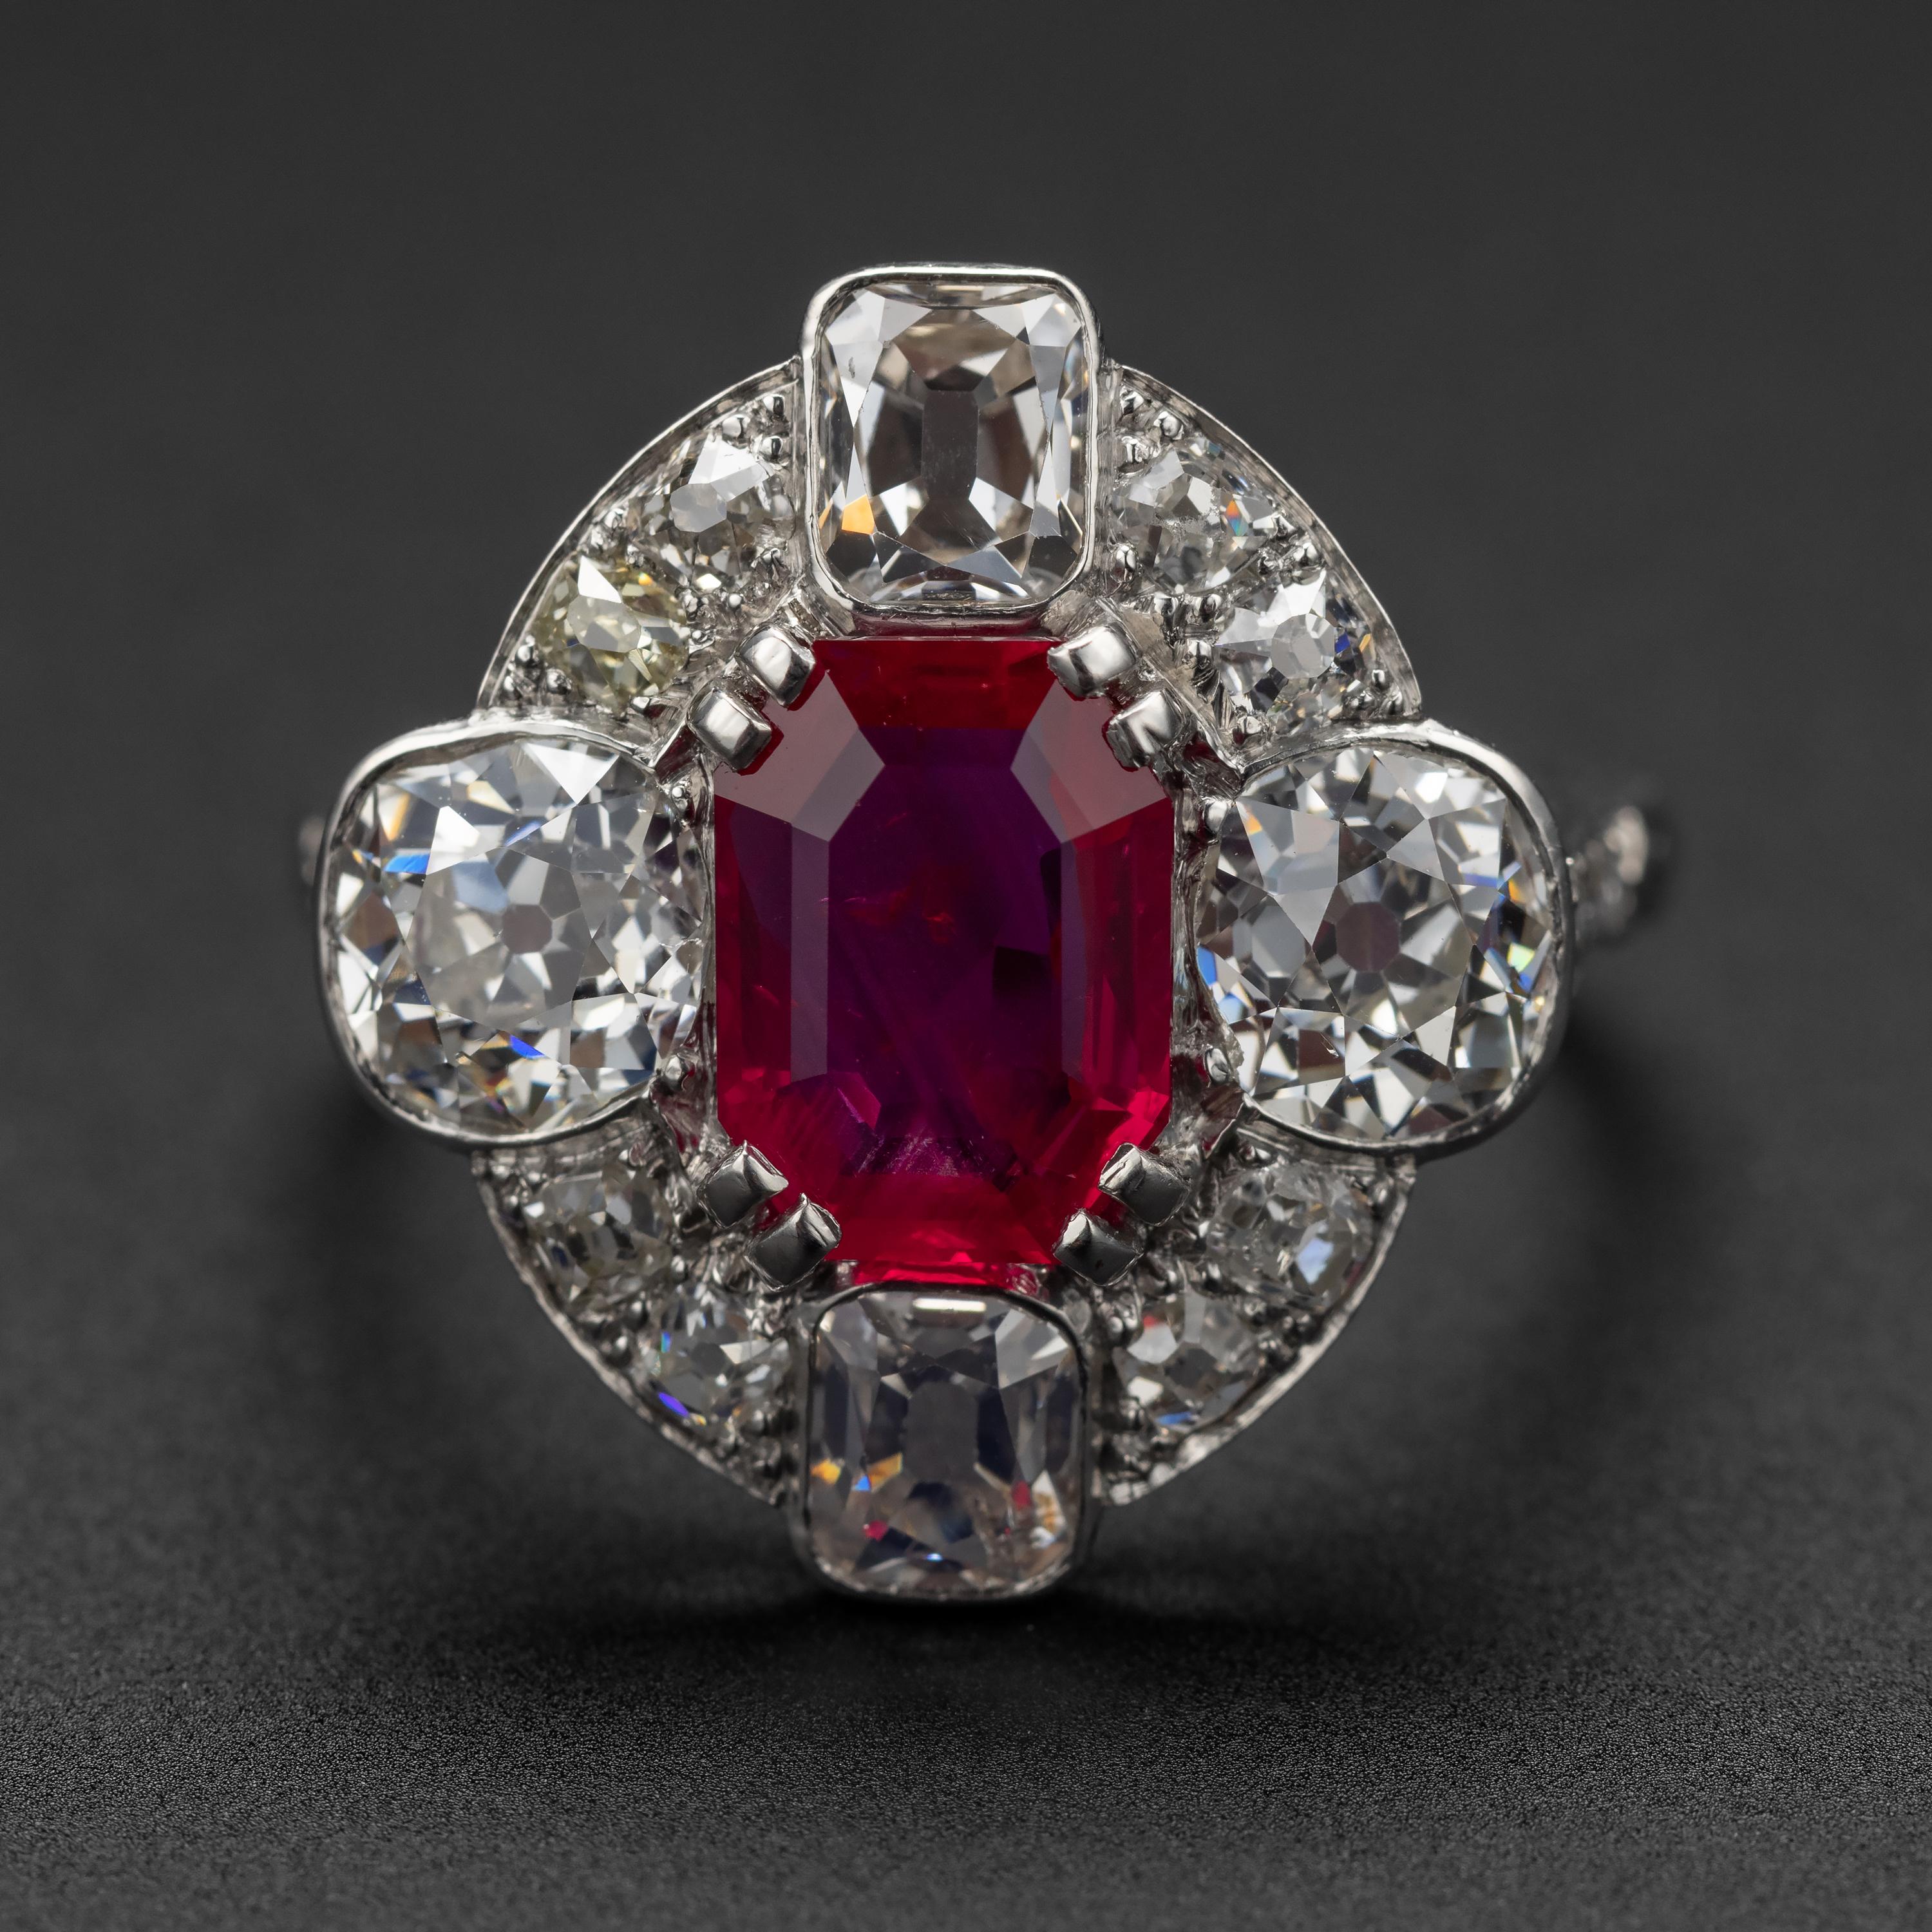 This sleek, dazzling ring of incomparable beauty and quality from the Art Deco era features as its focal point the most magnificent vivid red AGL-certified un-heated natural Burmese ruby weighing 2.24 carats. Surrounding this exceedingly rare and